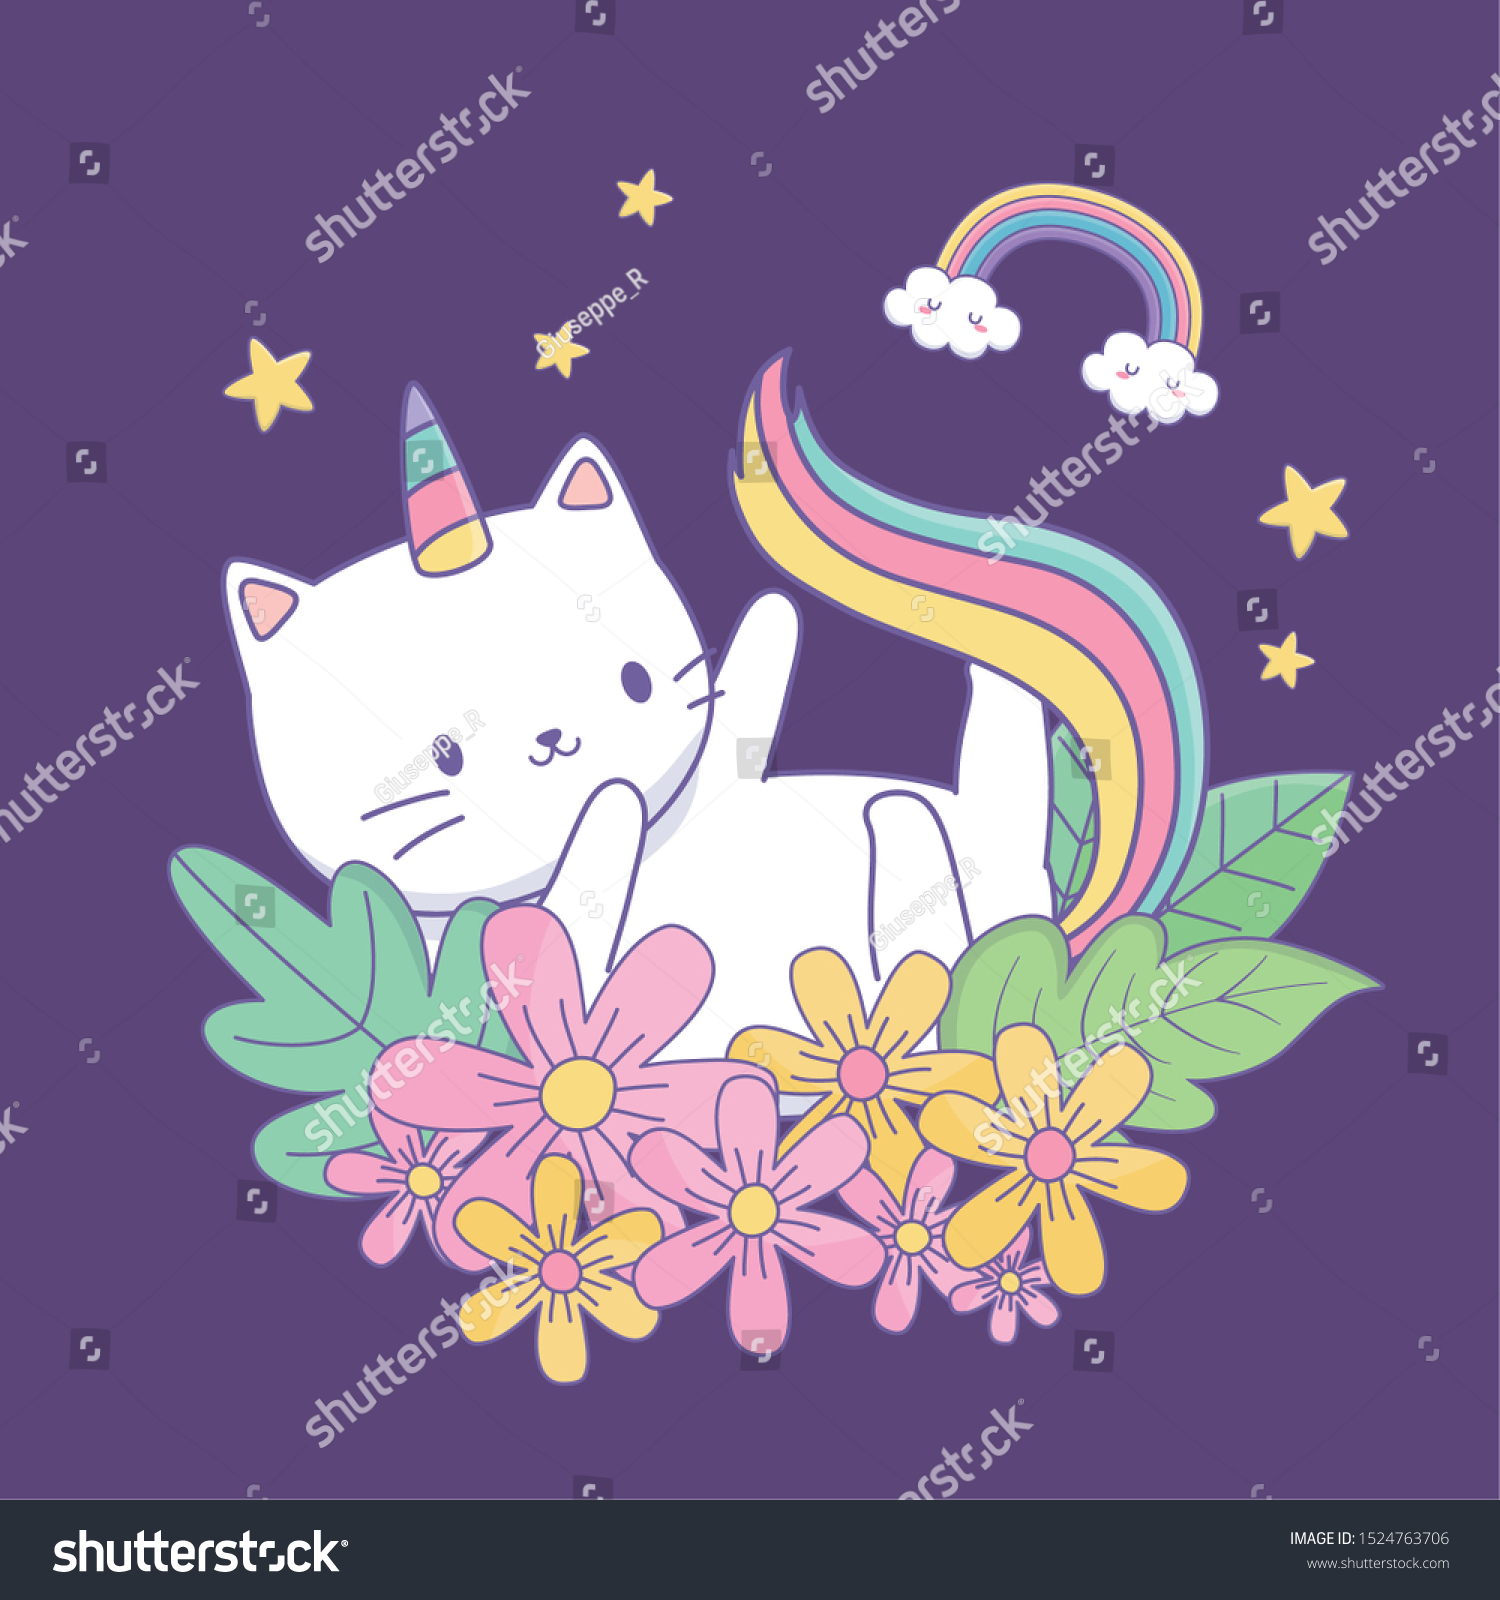 SVG of cute caticorn with floral decoration at night vector illustration design svg